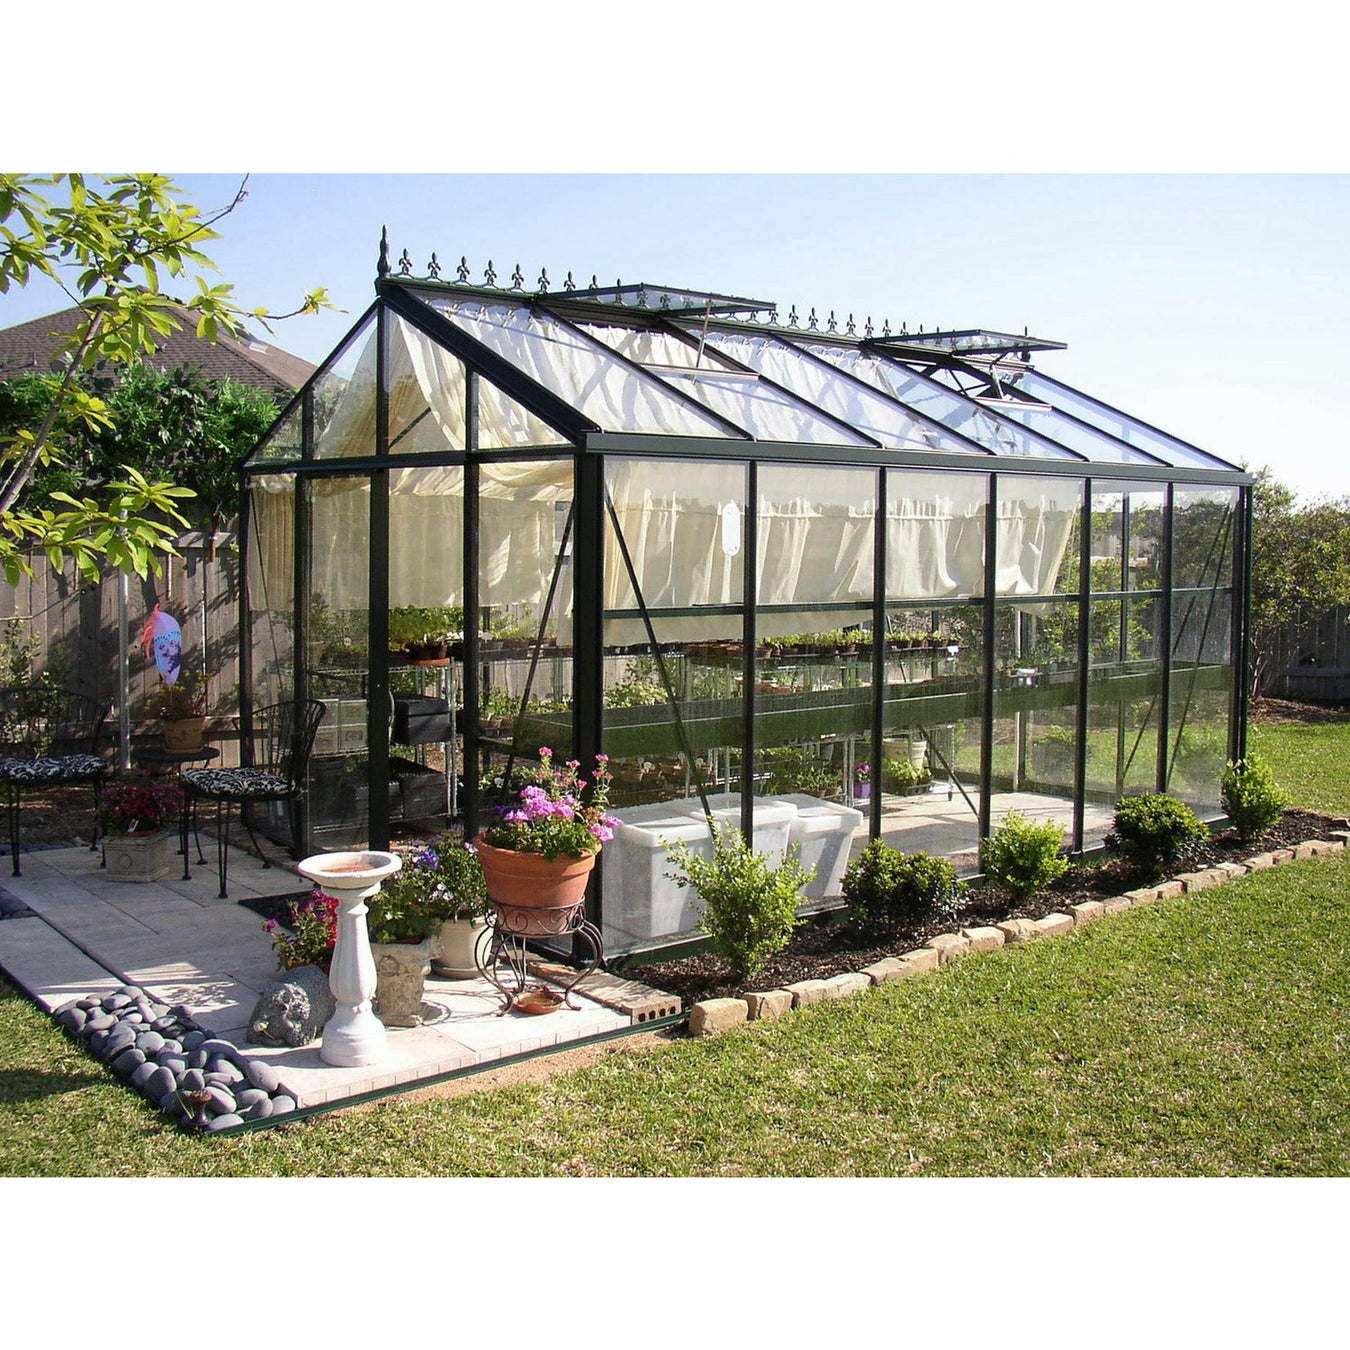 A Royal Victorian VI-34 greenhouse on a patio with open curtains and surrounding foliage in a serene garden setting.